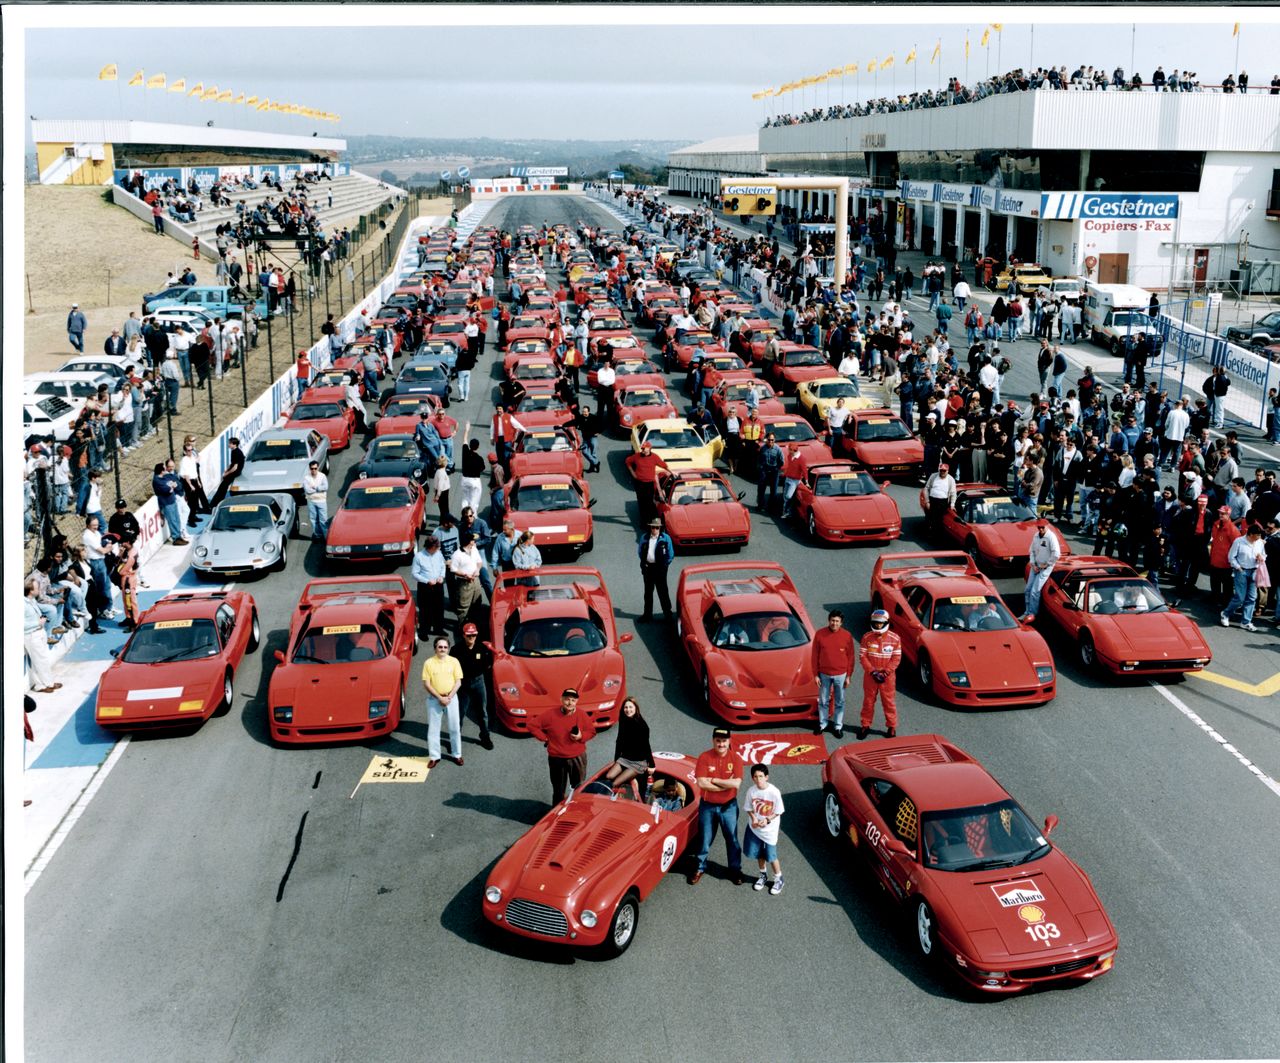 As the turn of the millennium approached, what had started with Enzo Ferrari facilitating gentlemen racing their cars had evolved into a global phenomenon. Here, racing enthusiasts gather at South Africa's Kyalami Circuit to celebrate Ferrari 50th Anniversary.